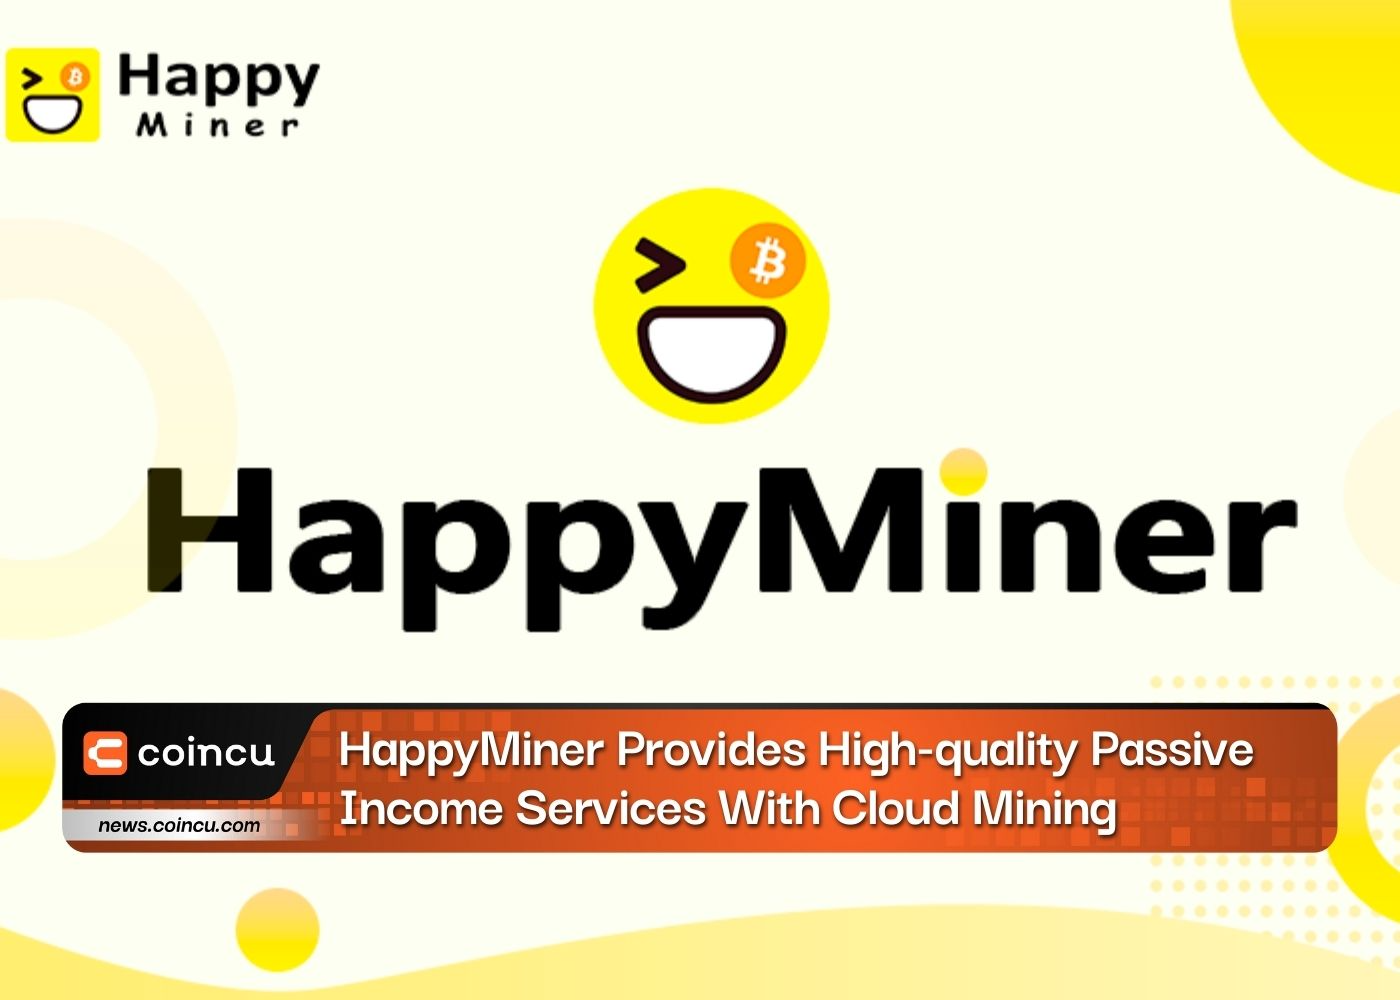 HappyMiner Provides High-quality Passive Income Services With Cloud Mining